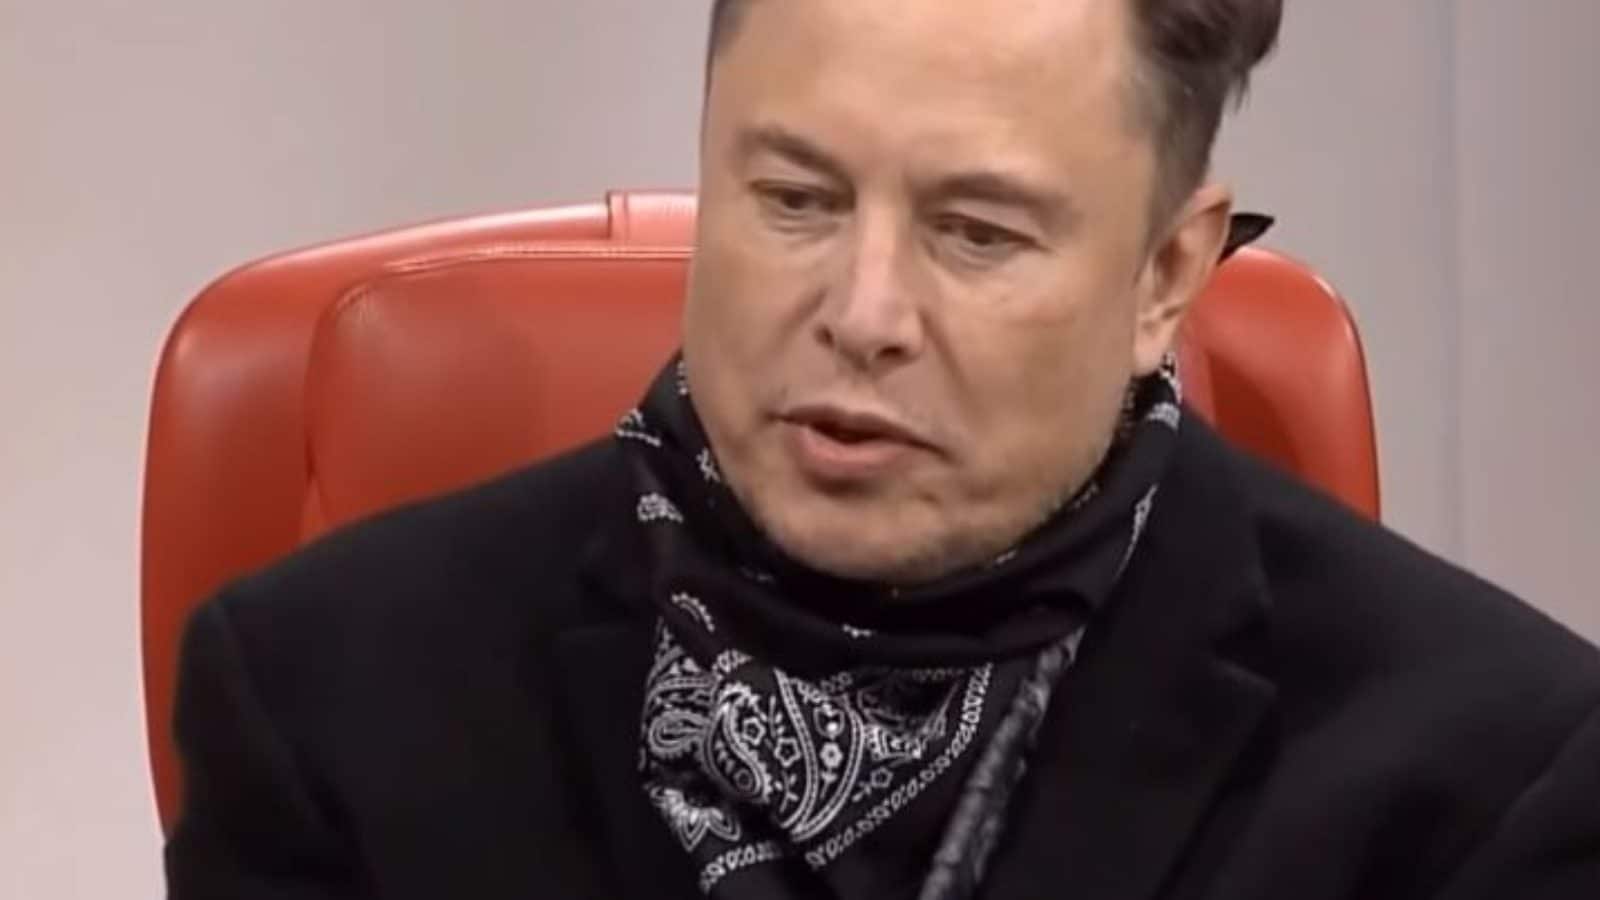 Elon Musk Thinks 'Civilization Will Crumble' if People 'Don't Have More Children'